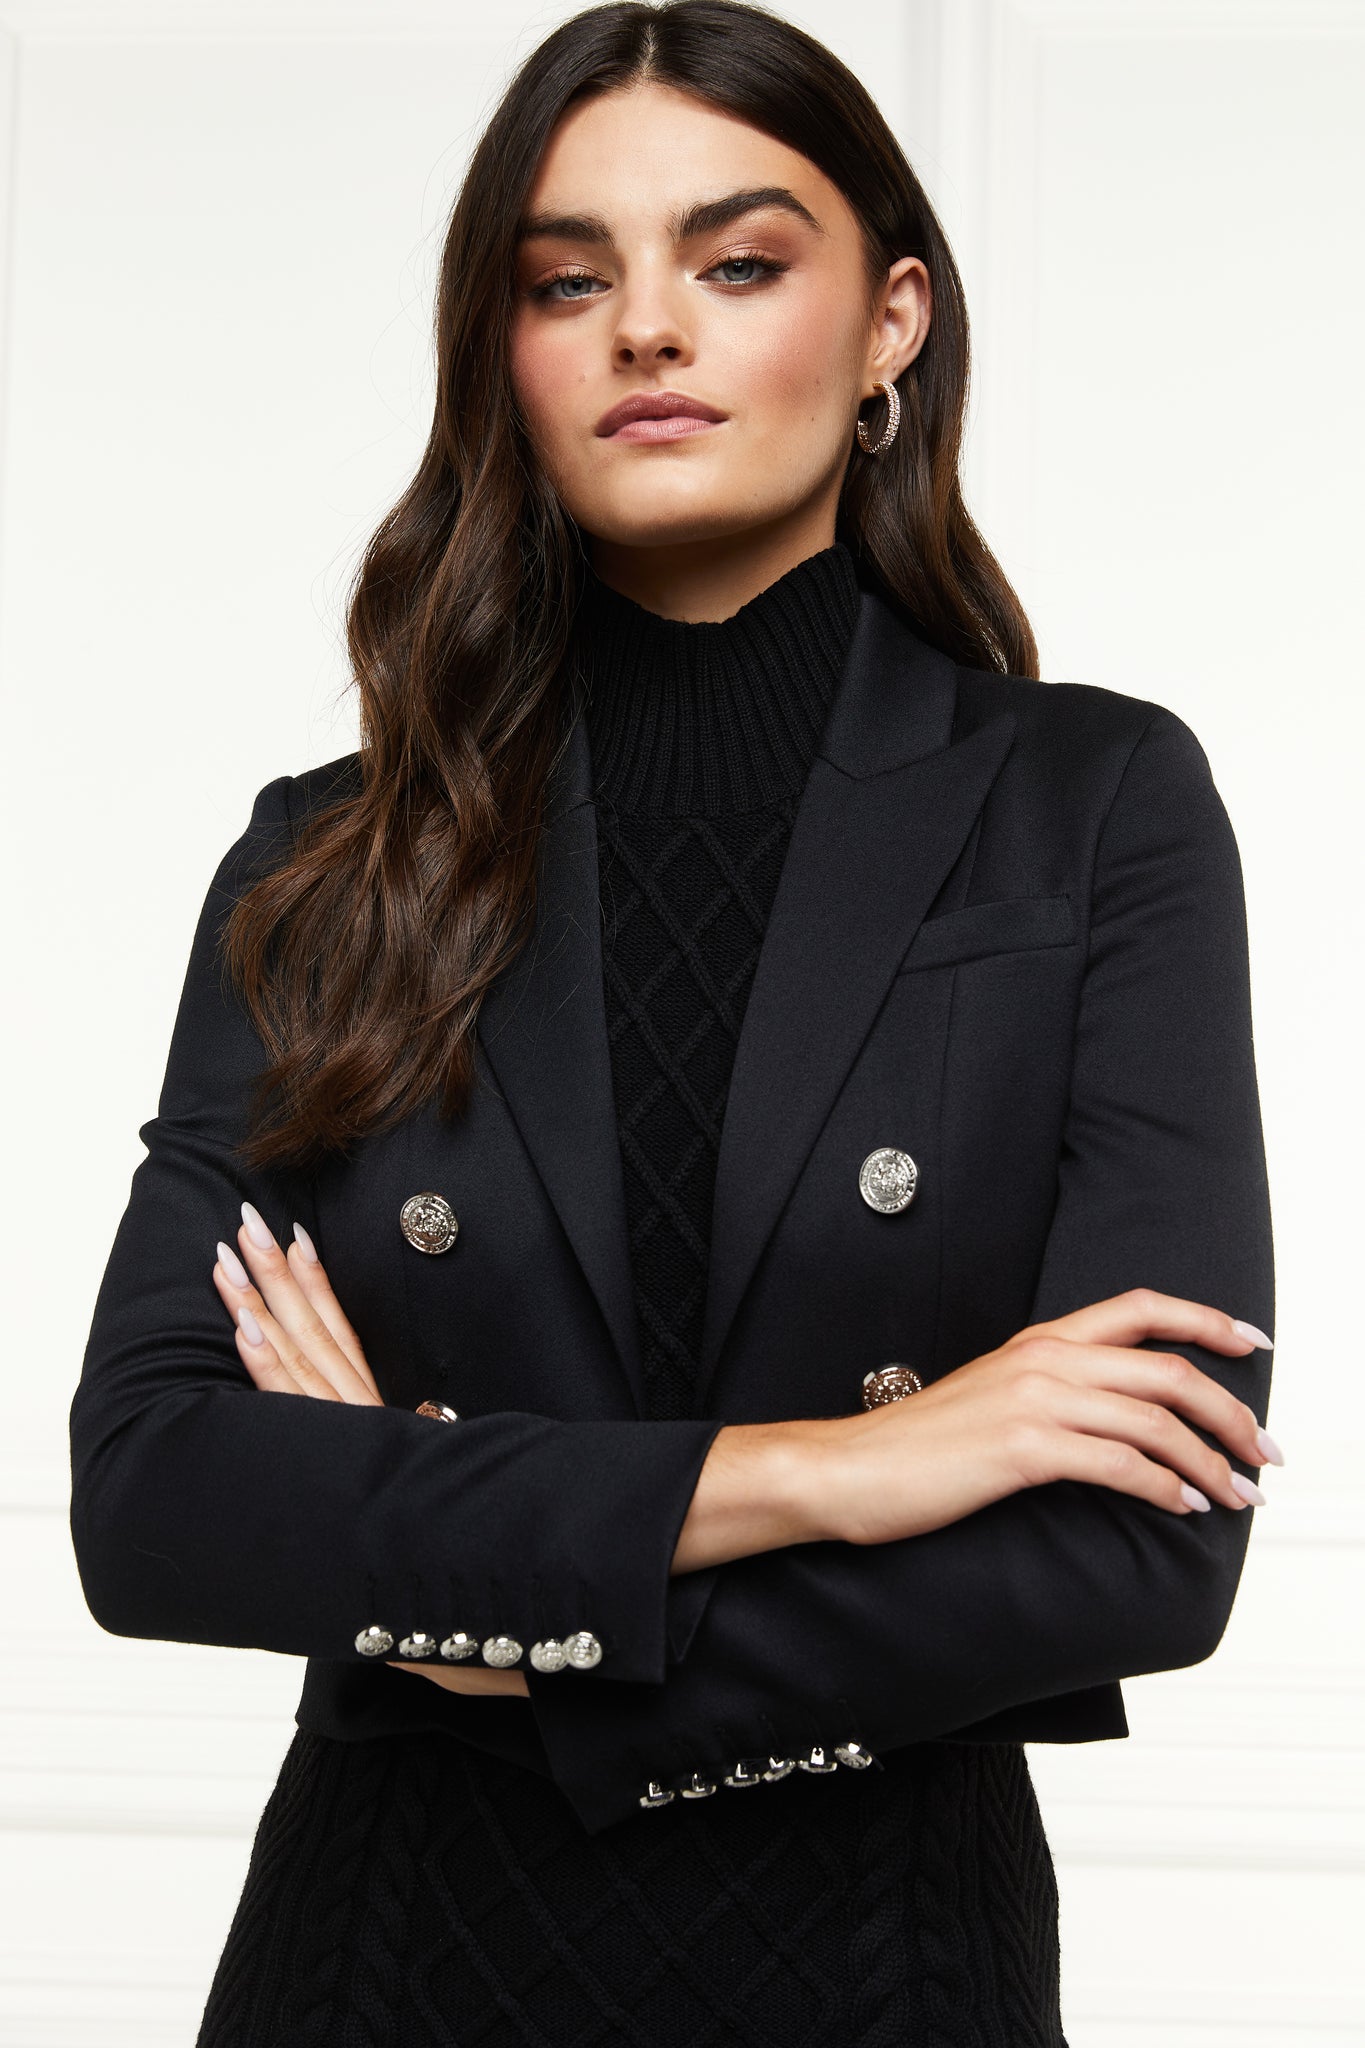 British made tailored cropped jacket in black with welt pockets and gold button detail down the front and on sleeves